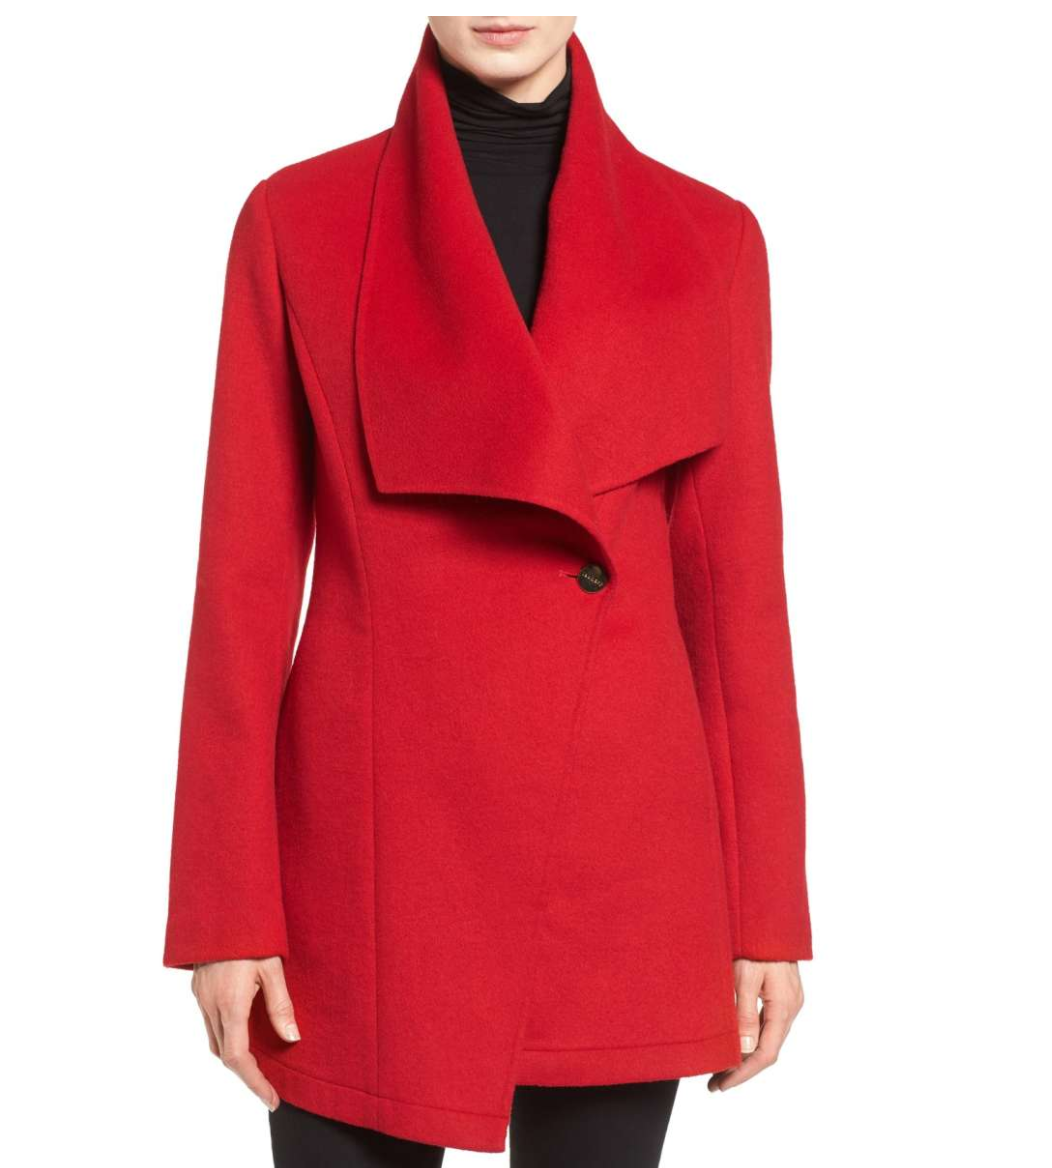 Red coat from Nordstrom